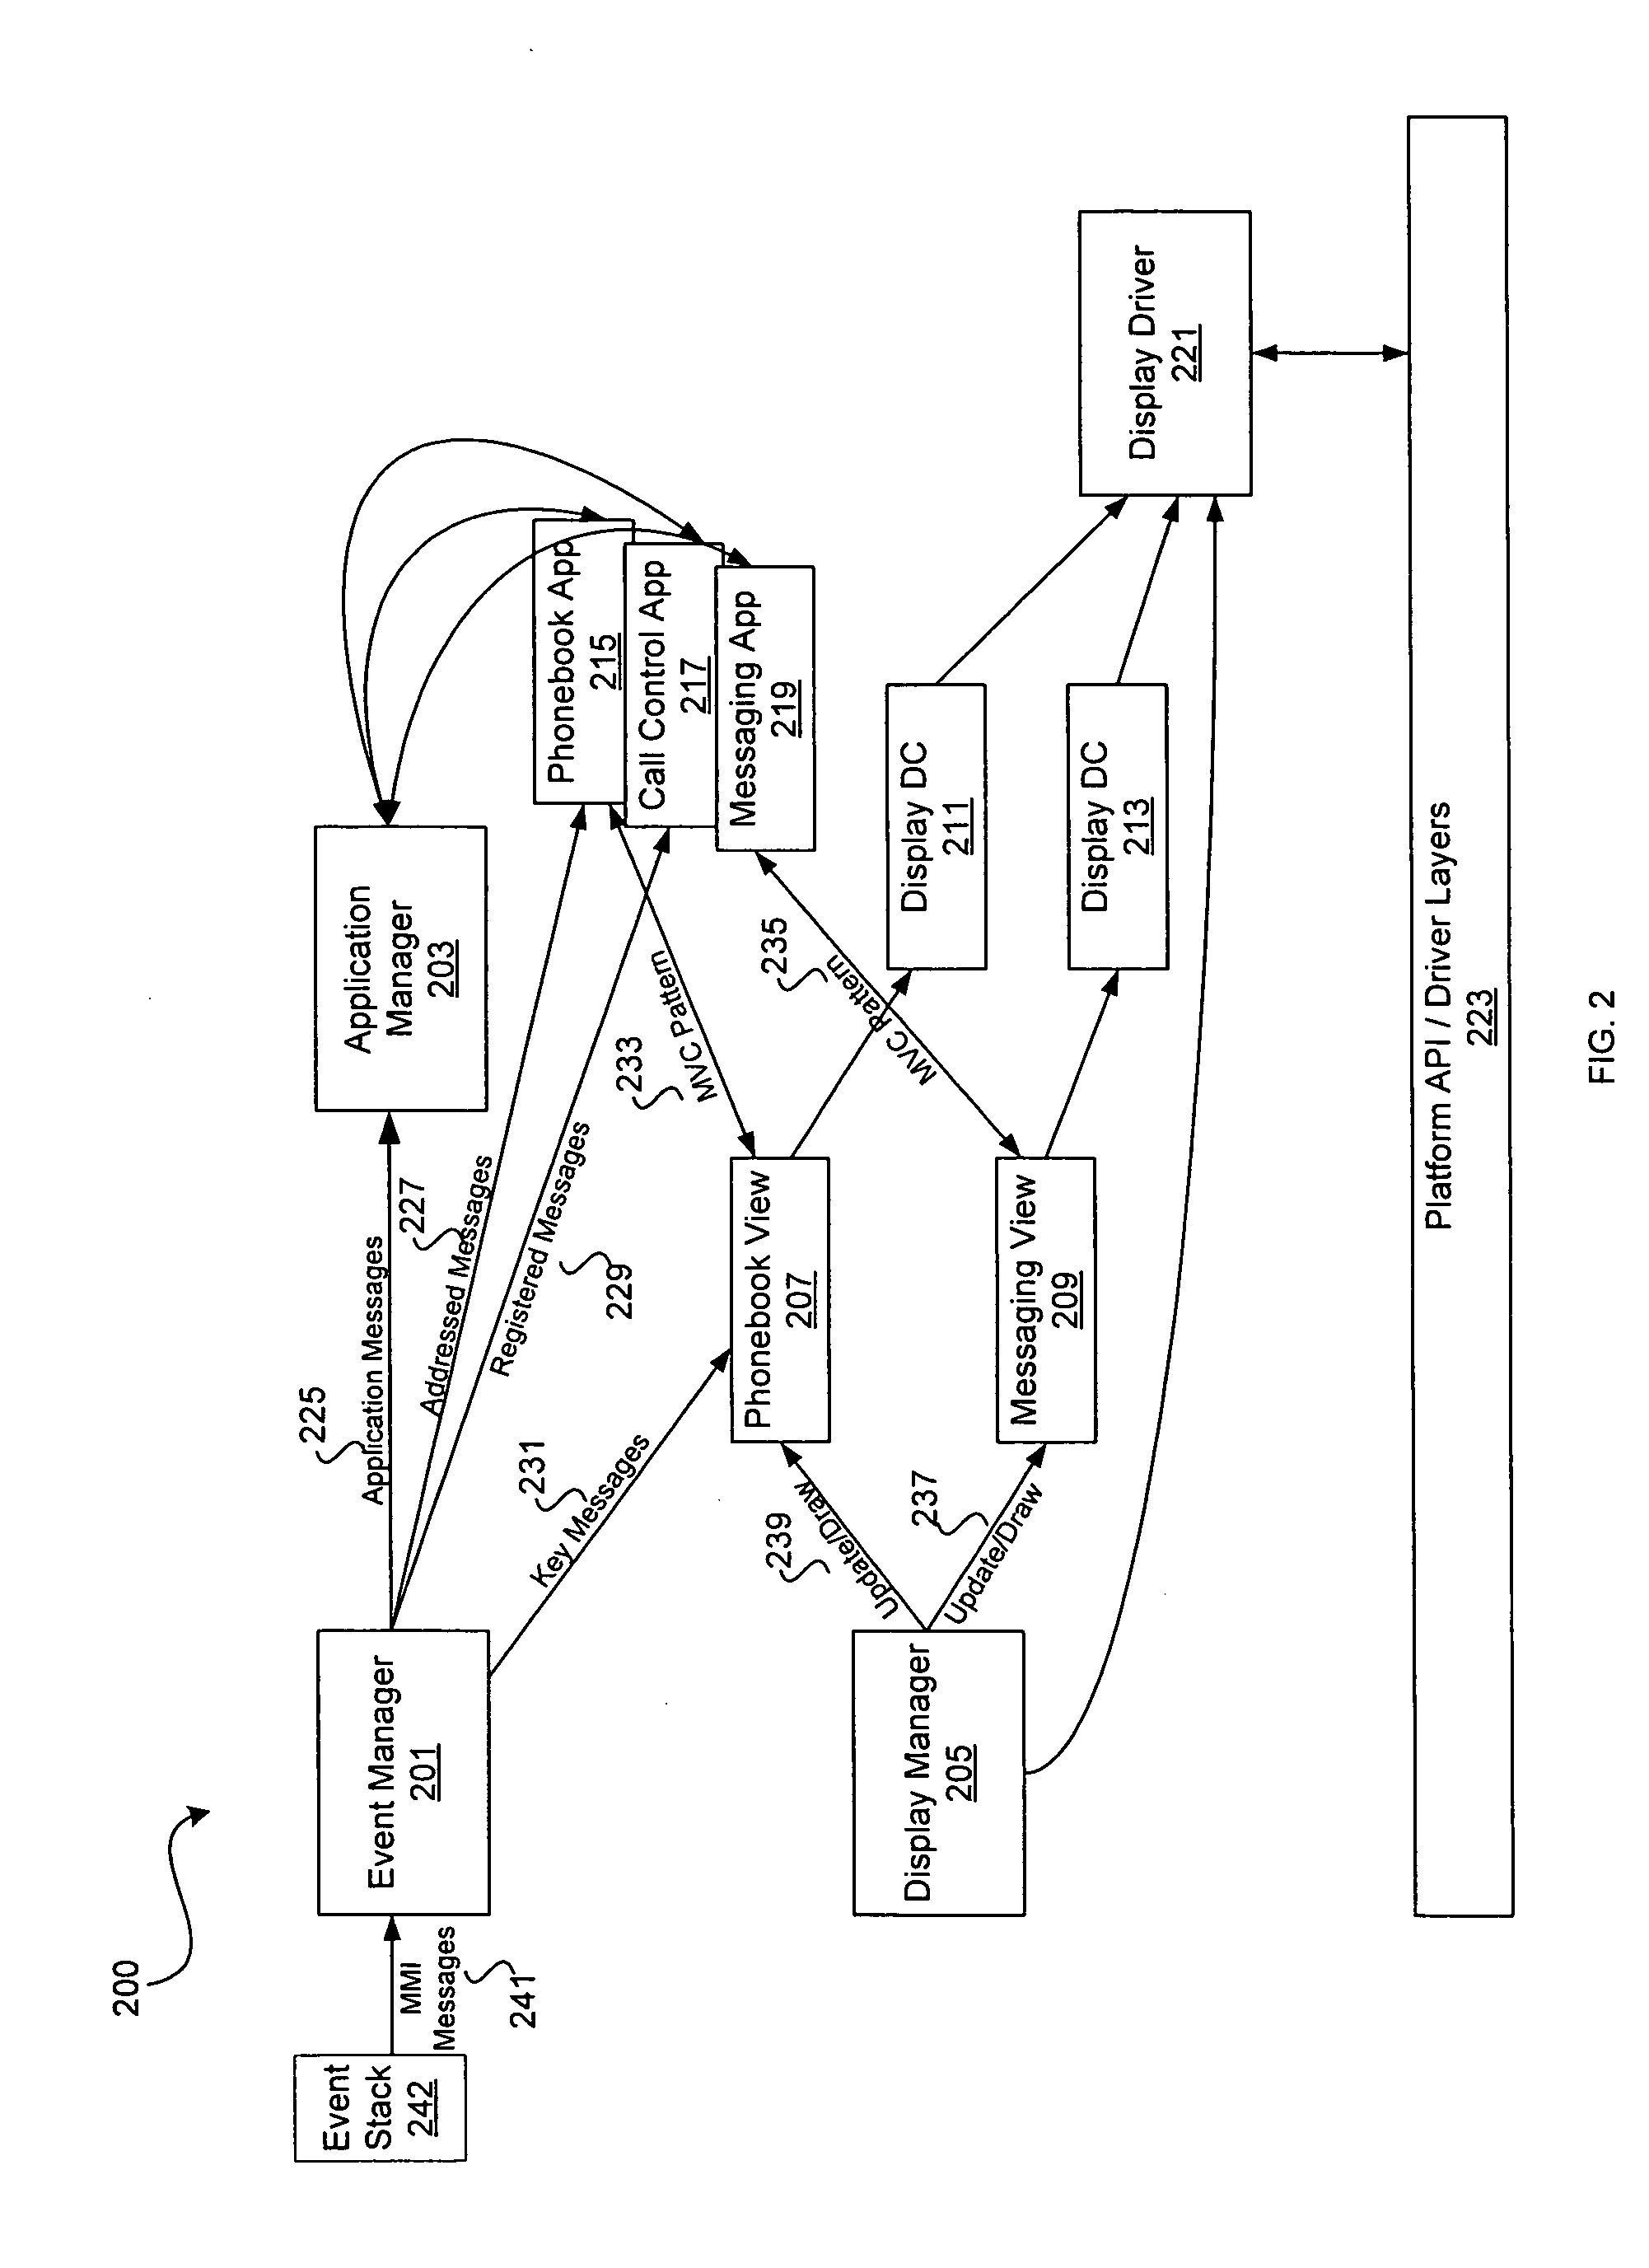 Method and system for providing text information in an application framework for a wireless device